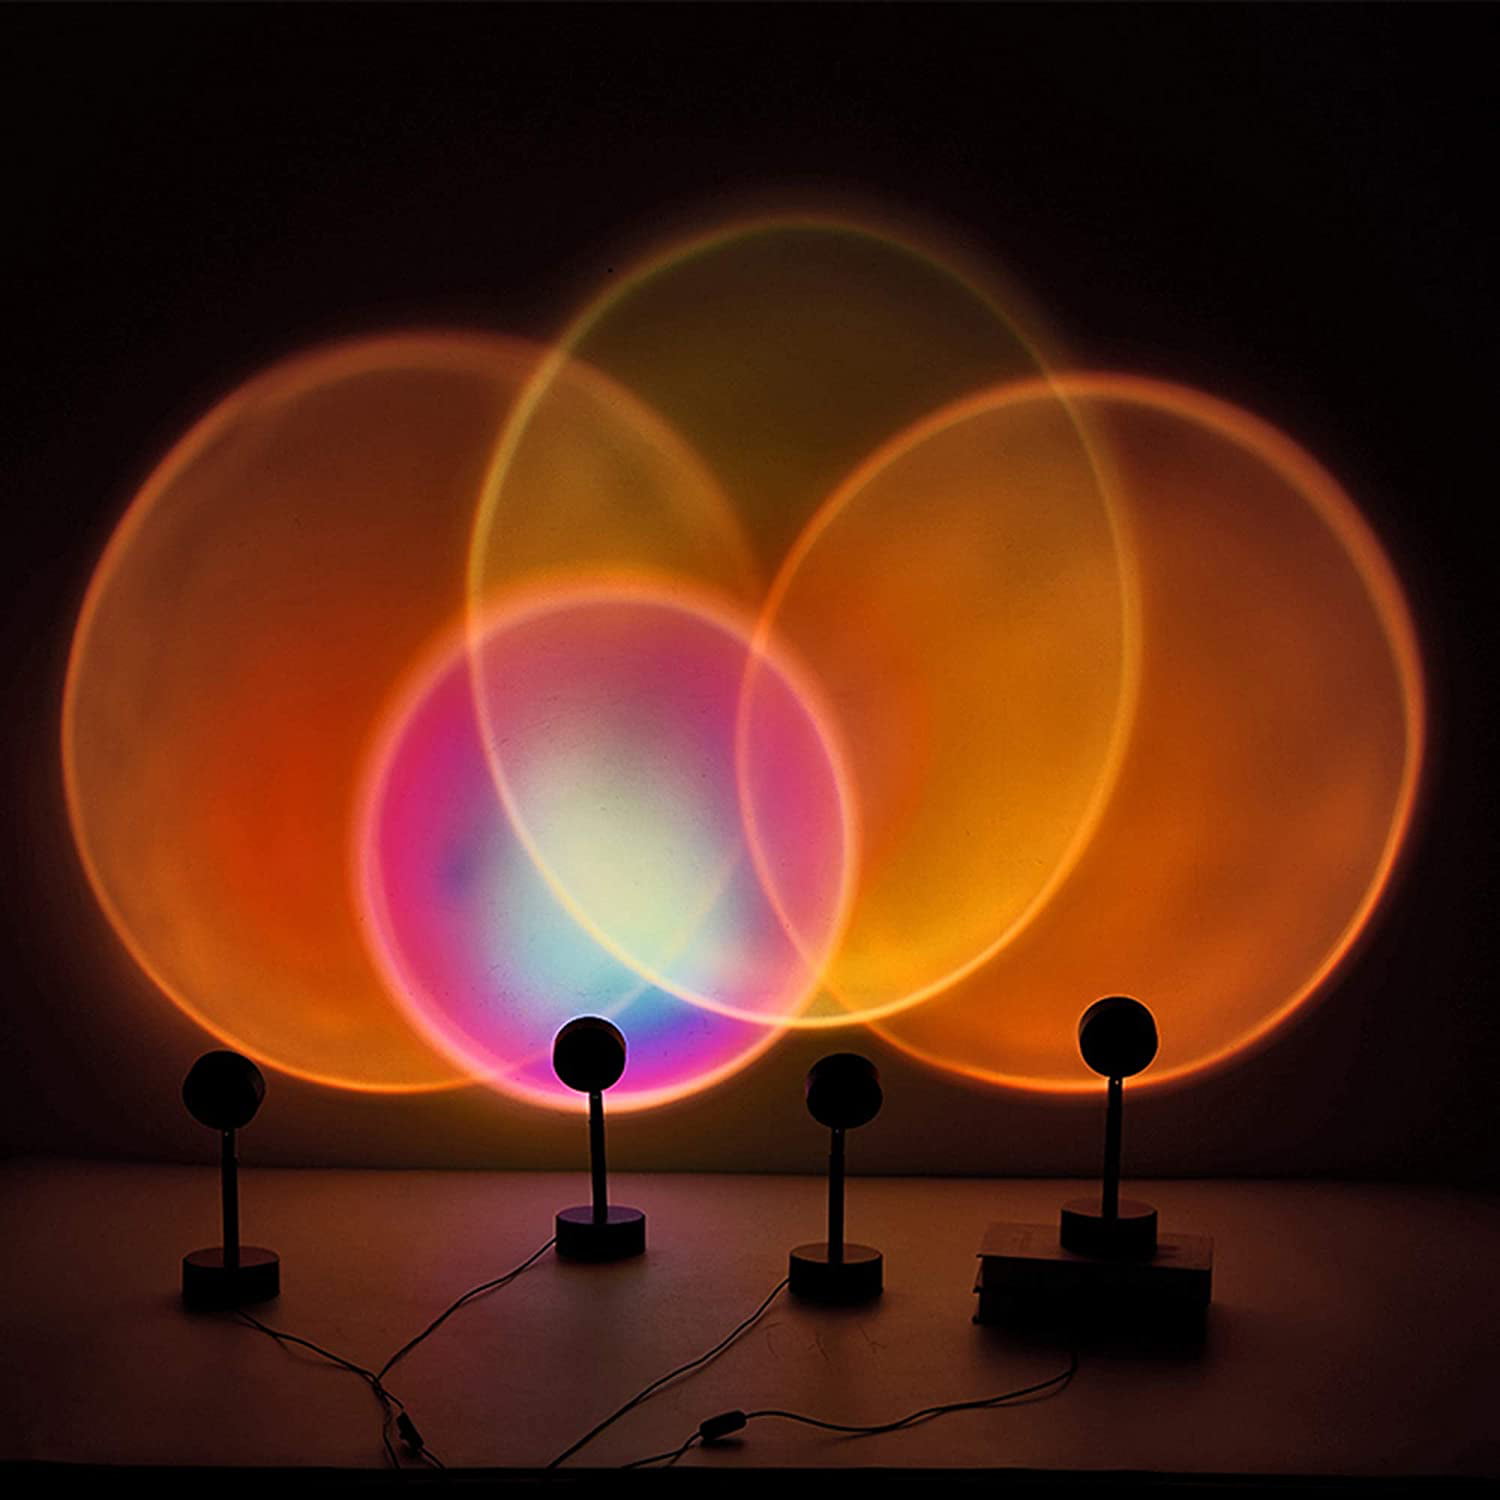 R 180 Degree Rotation Rainbow Projection Lamp Led Light Details about   Sunset Projection Lamp 